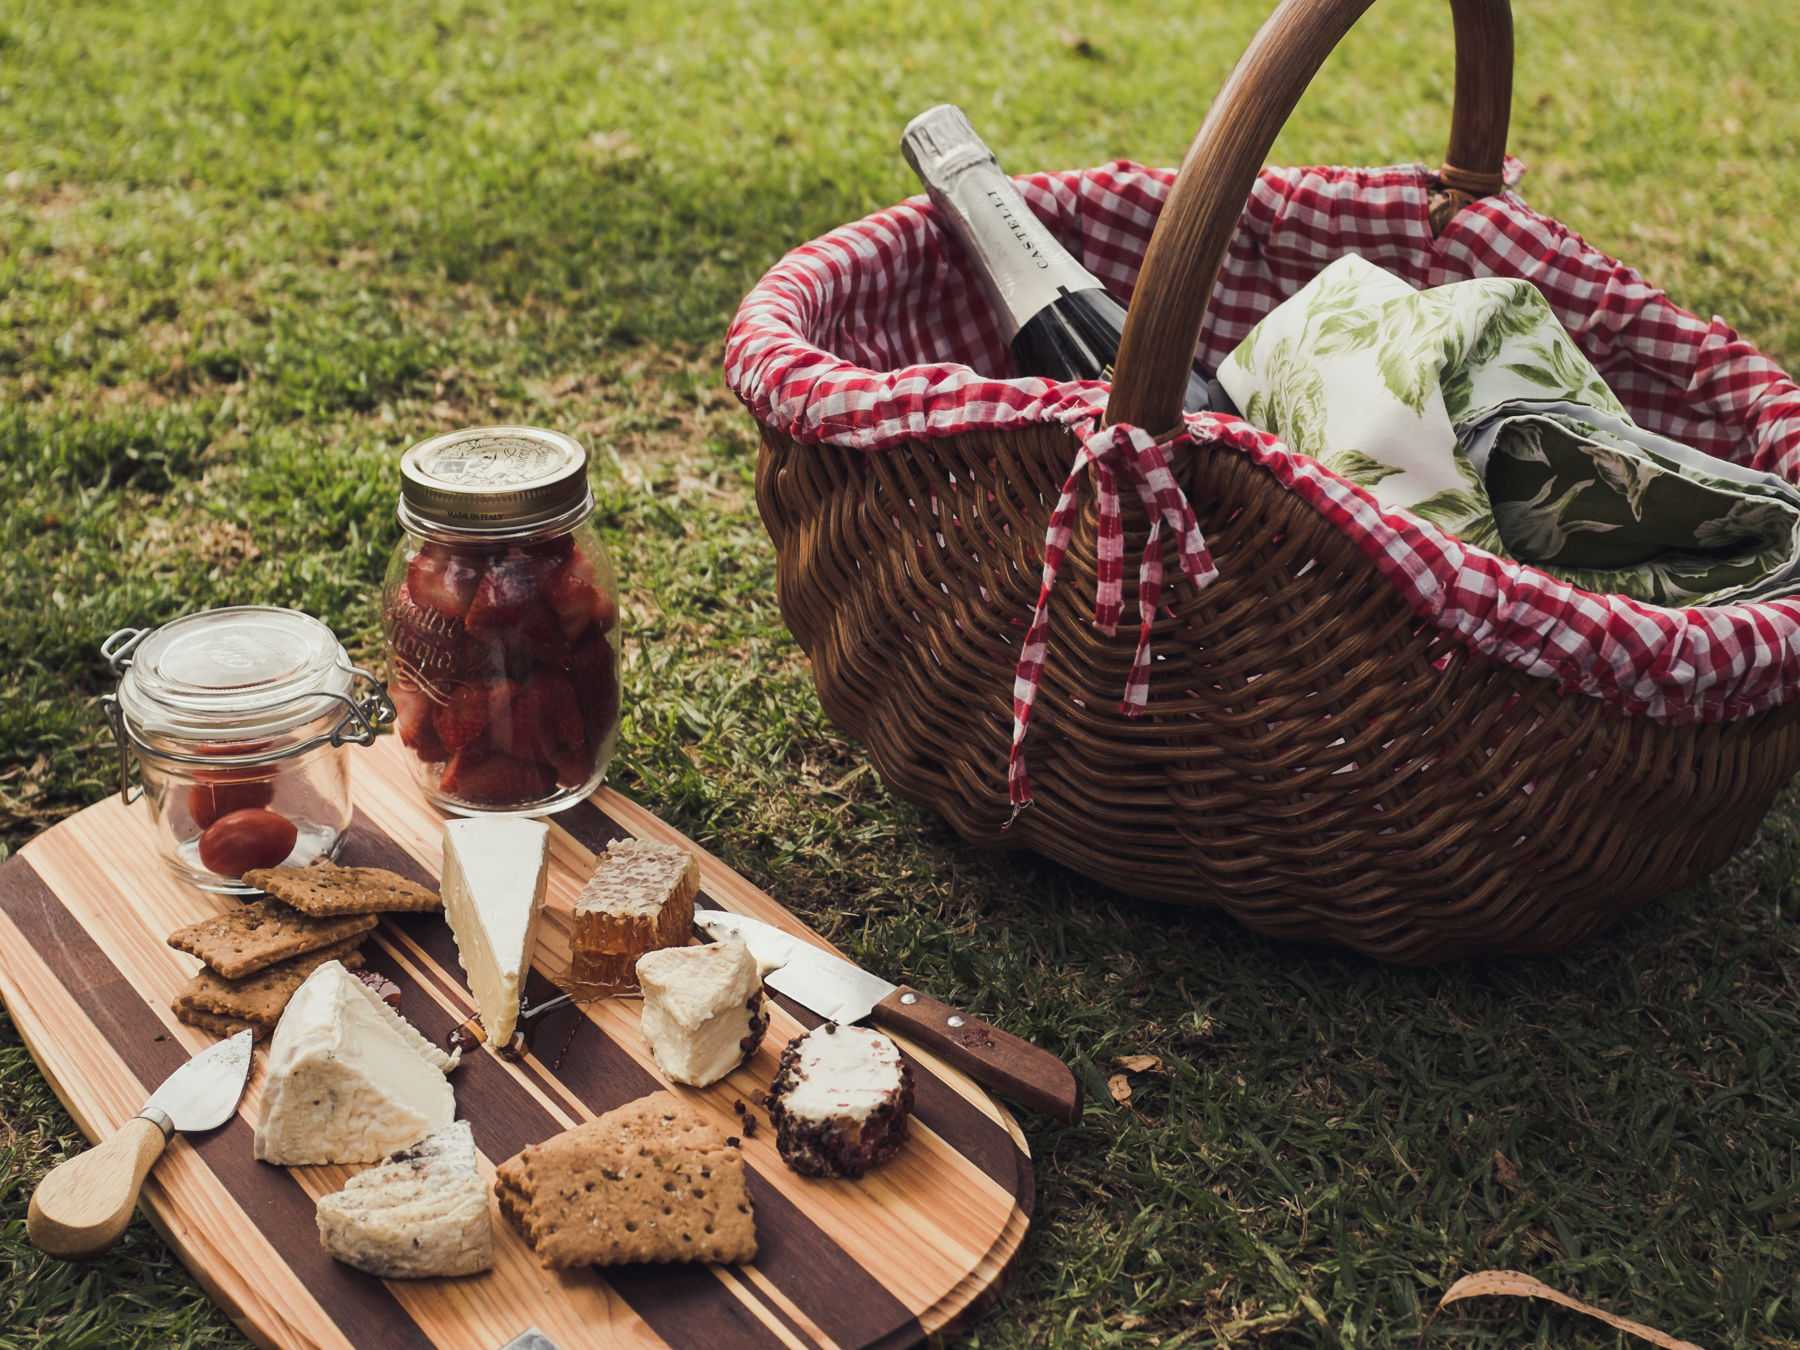 Where to stock up for a Picnic in Perth